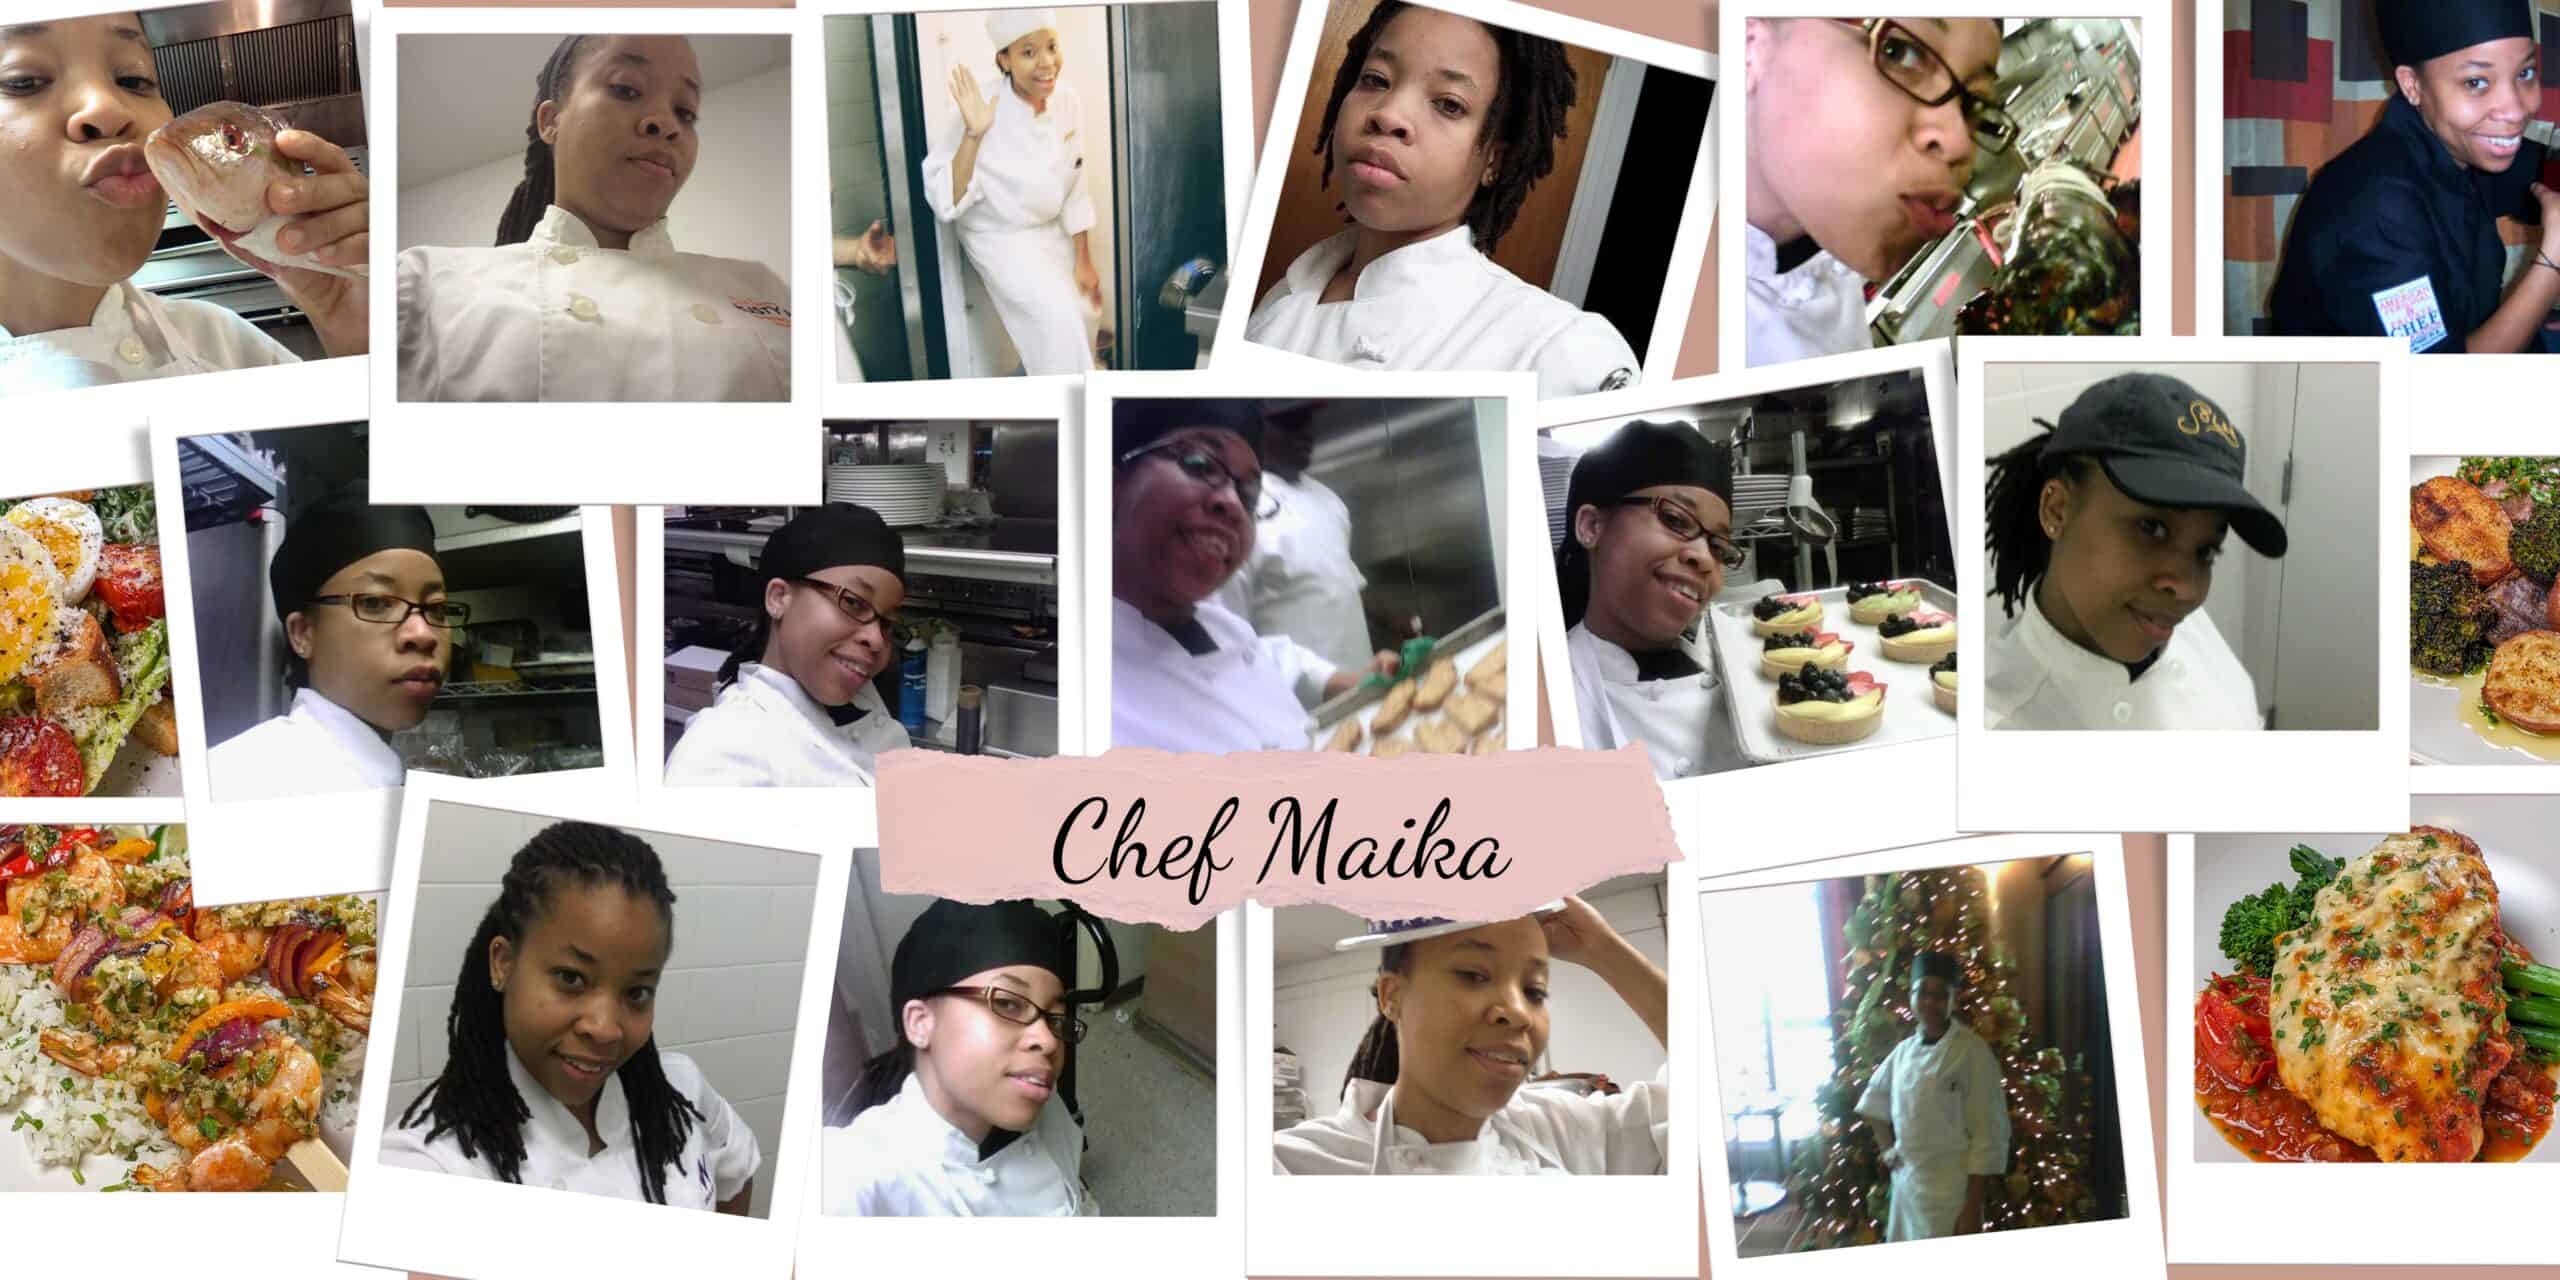 A polaroid collection of chef Maika in her chef uniform in different hotel and commercial kitchens.